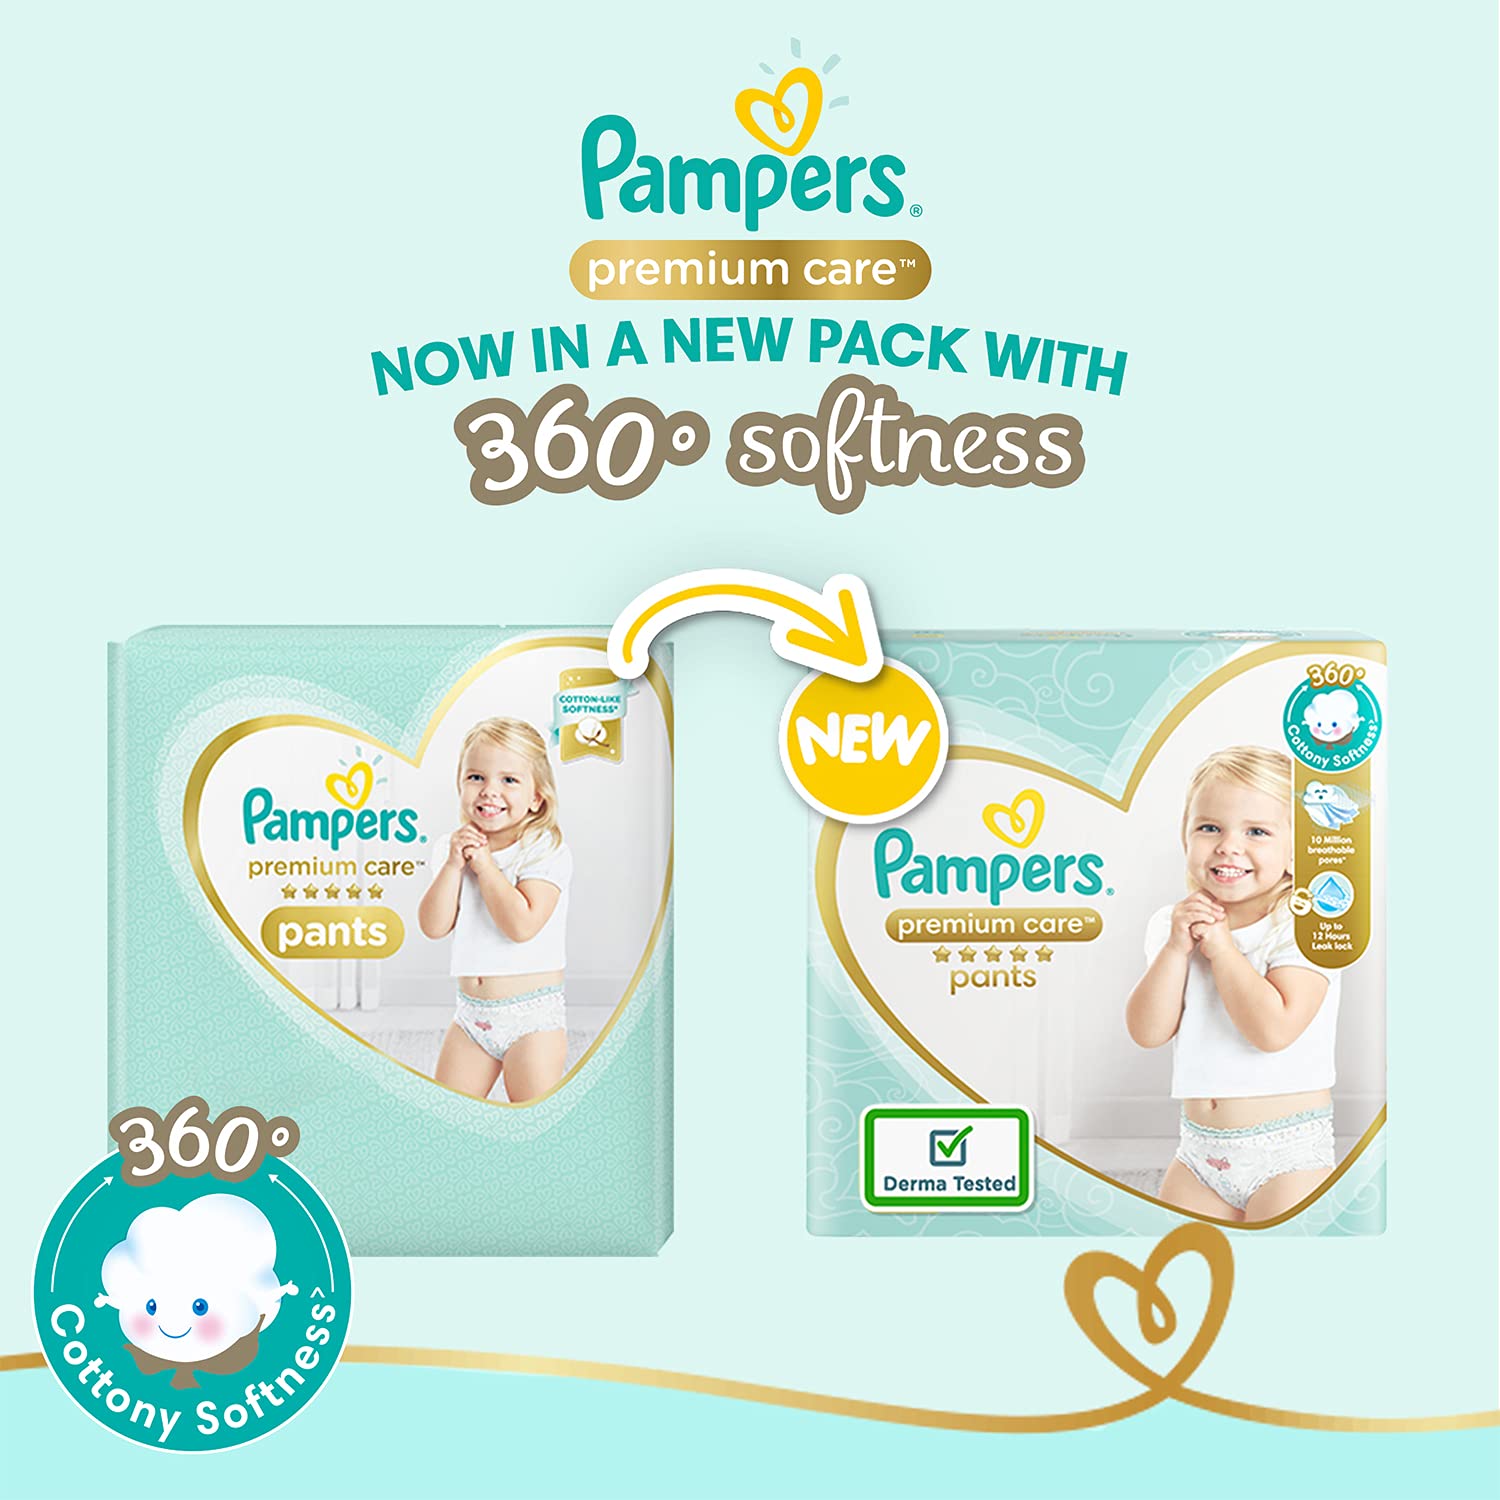 Buy Pampers Premium Care Diapers Pants, Small at Best Price from Mumpa - 24